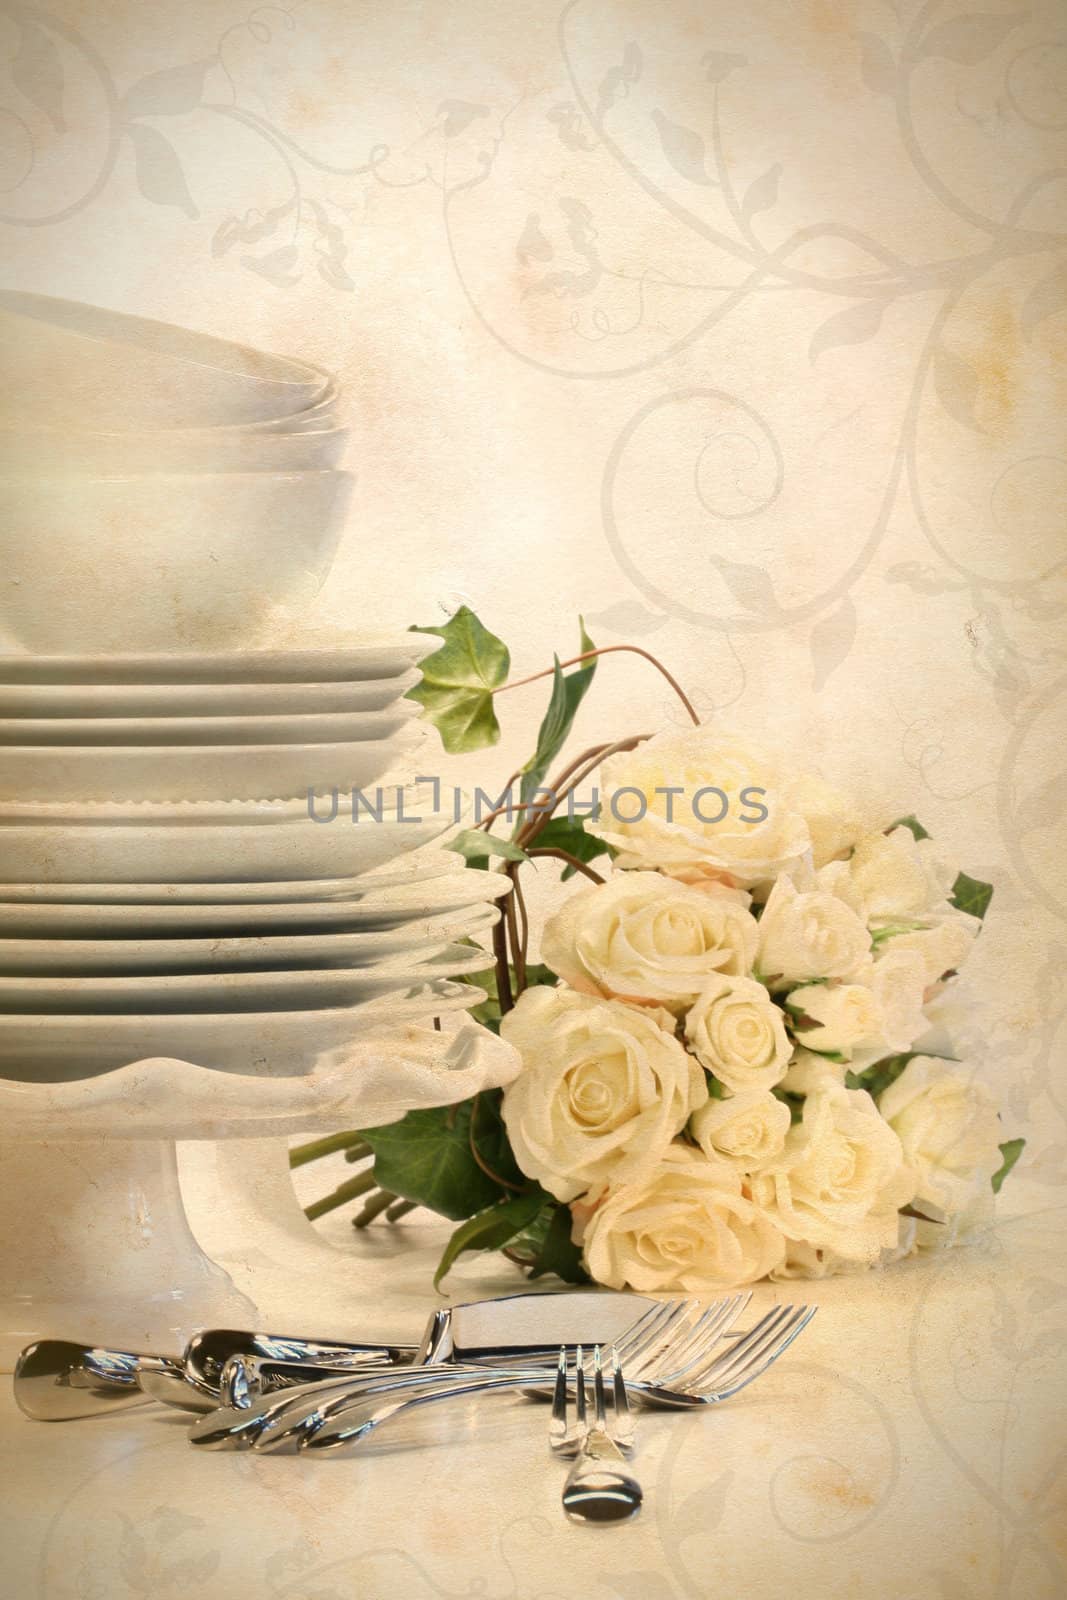 Assortment of plates for wedding on white background/ Vintage look